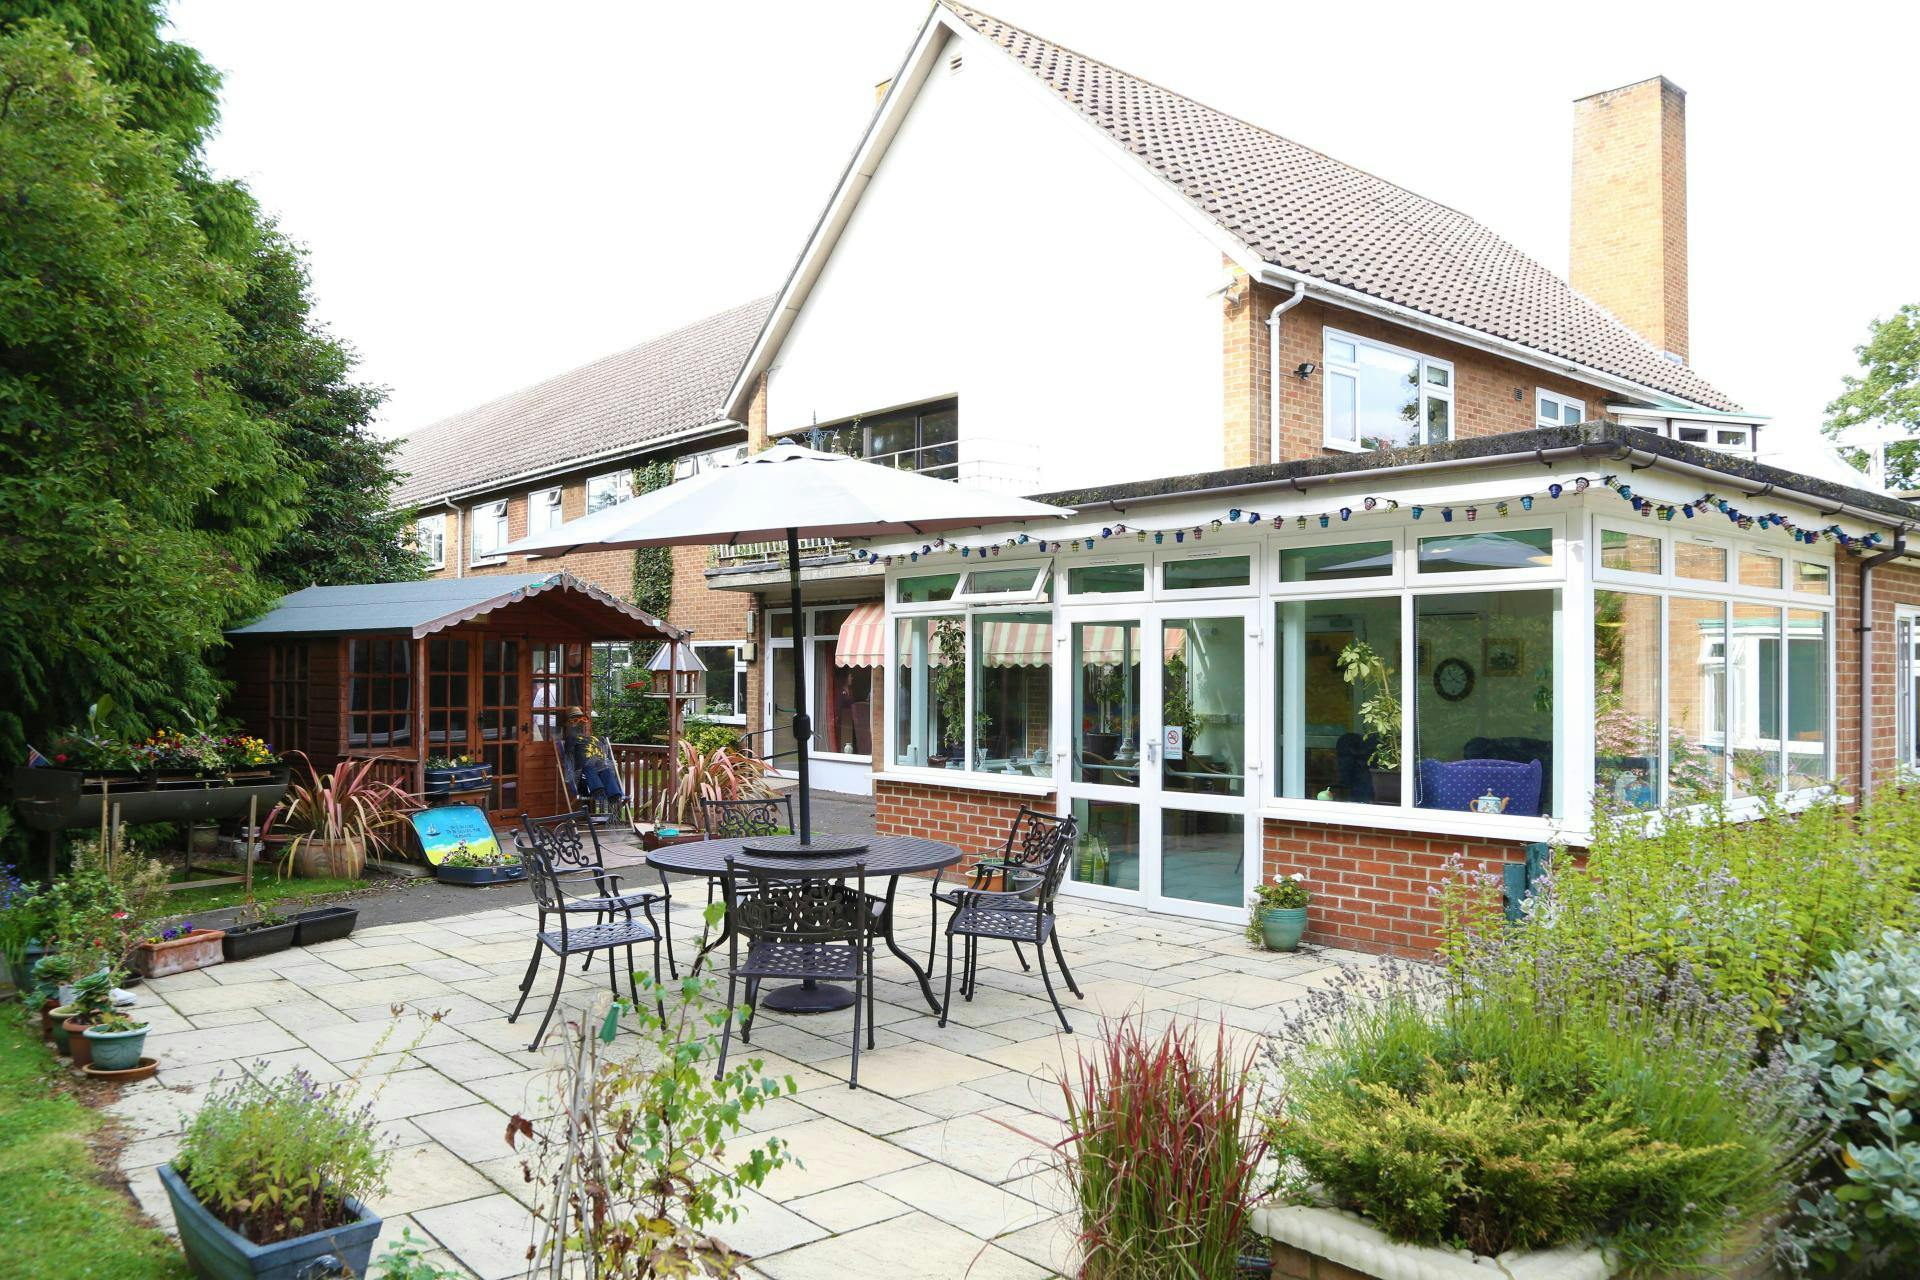 Exterior of Patchett Lodge Care Home in Spalding, South Holland